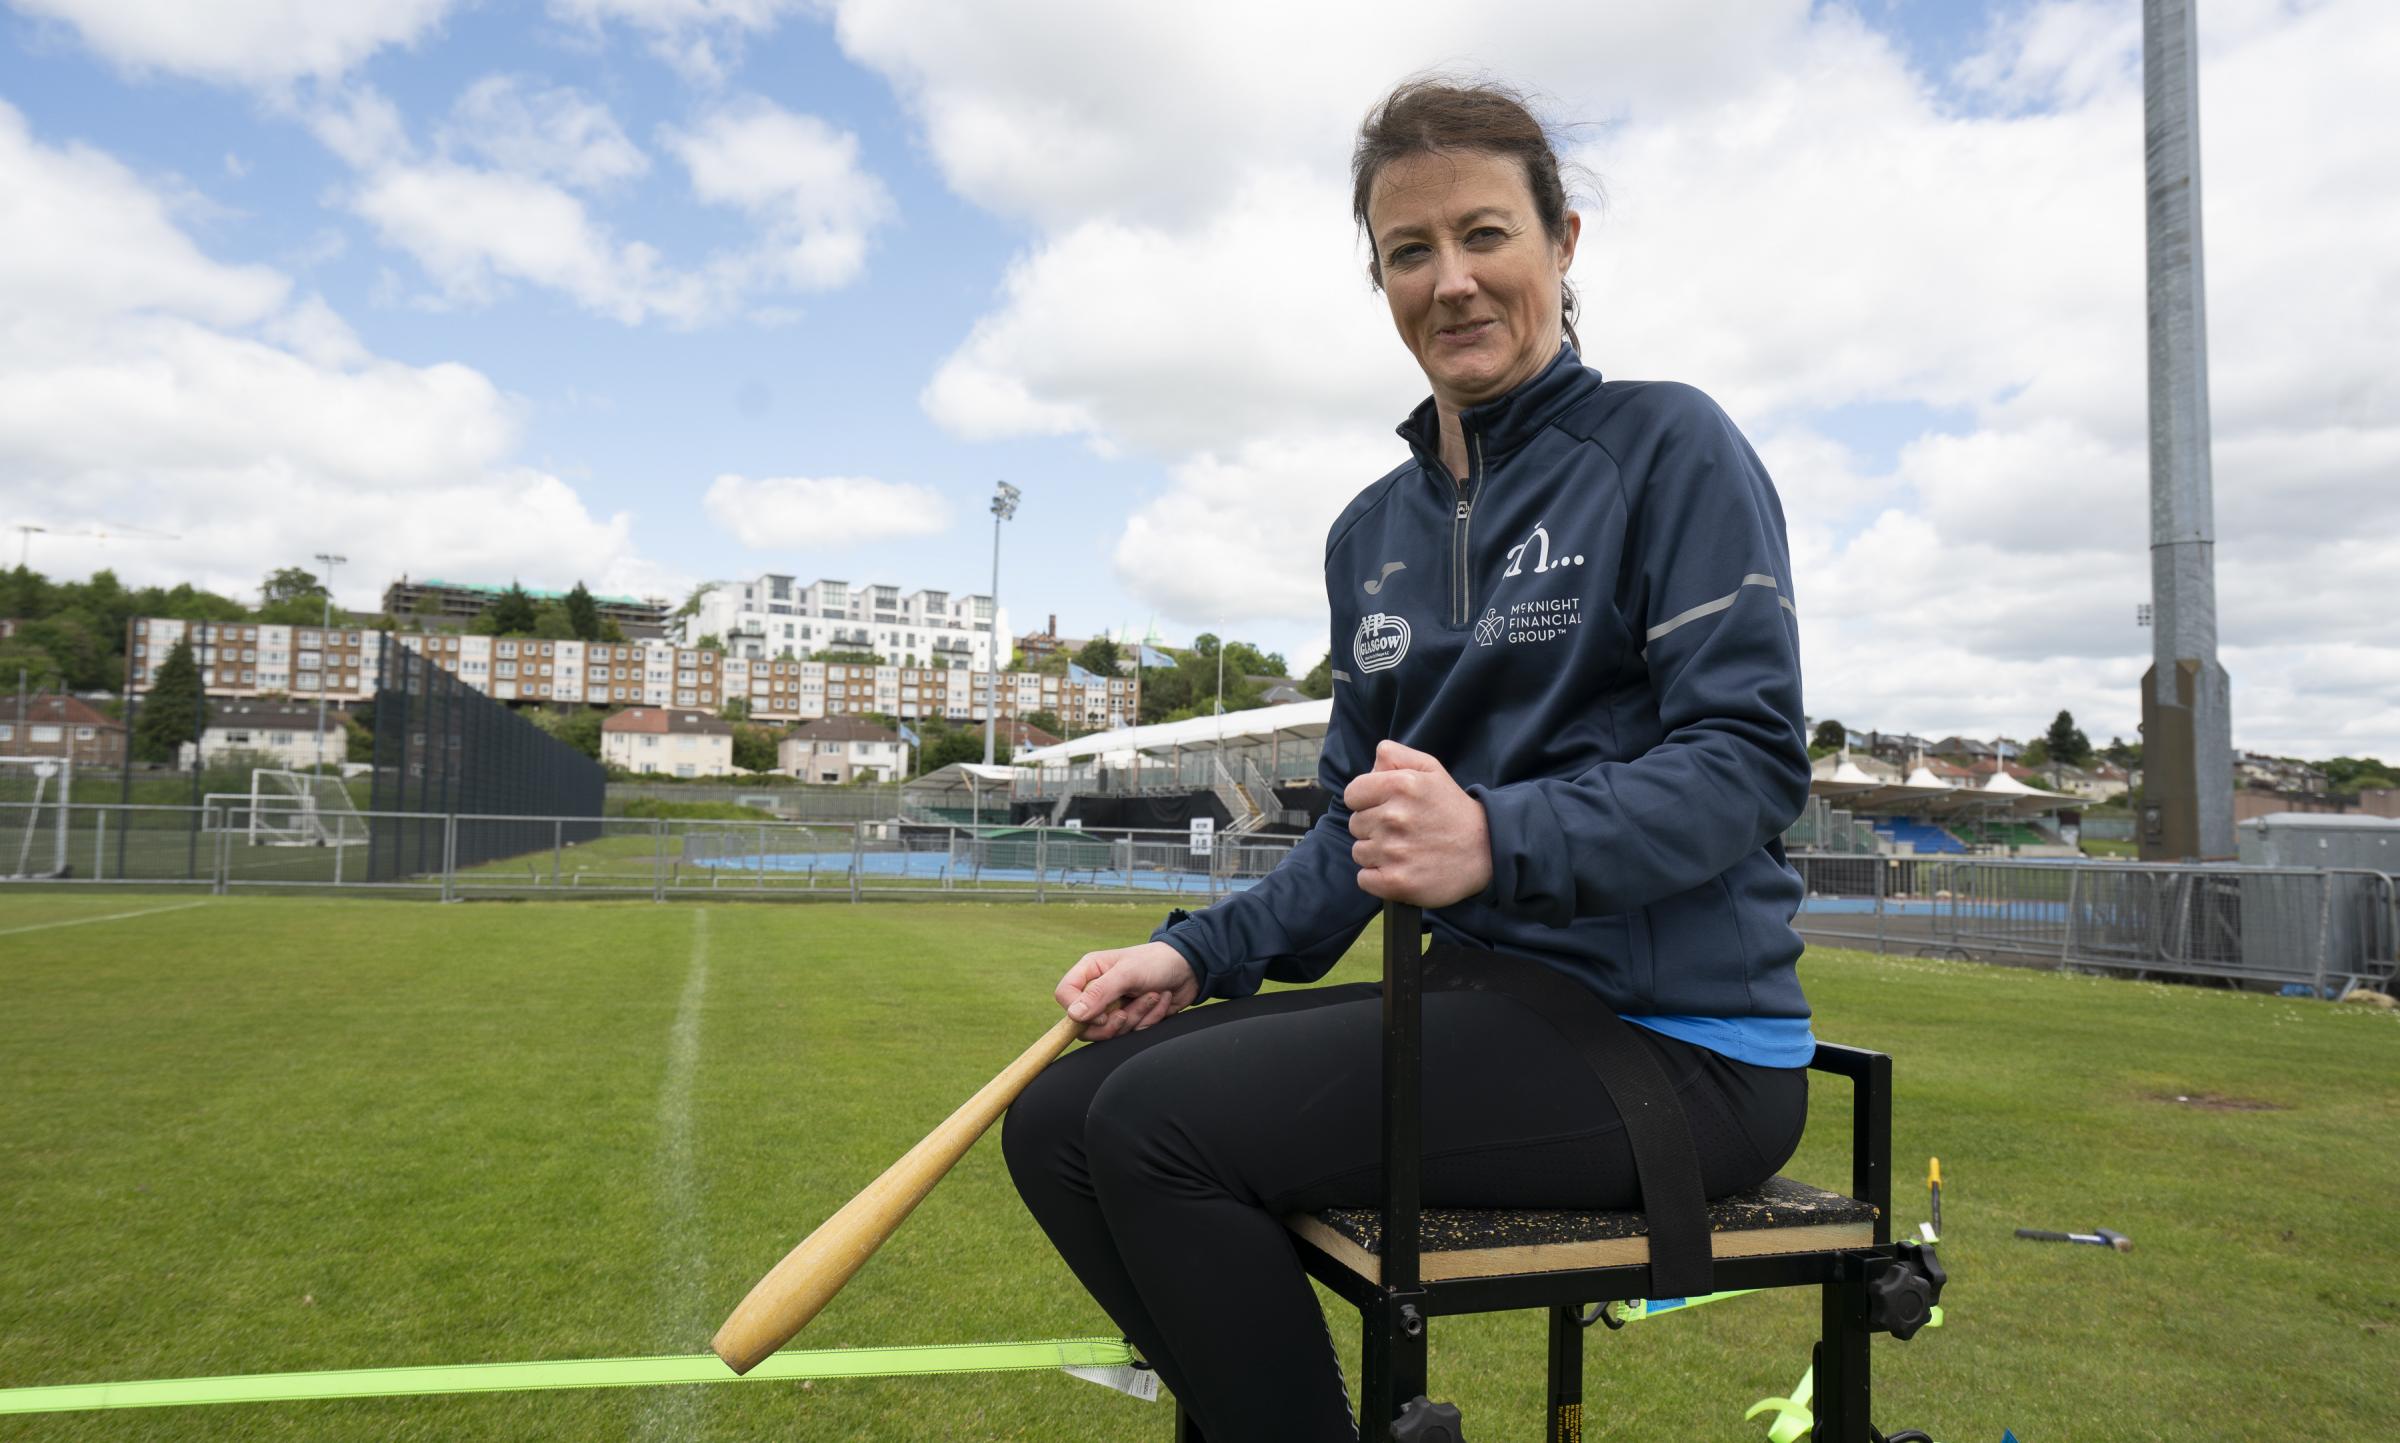 Dr Julie McElroy says having the chance to take up sport again has been a game changer